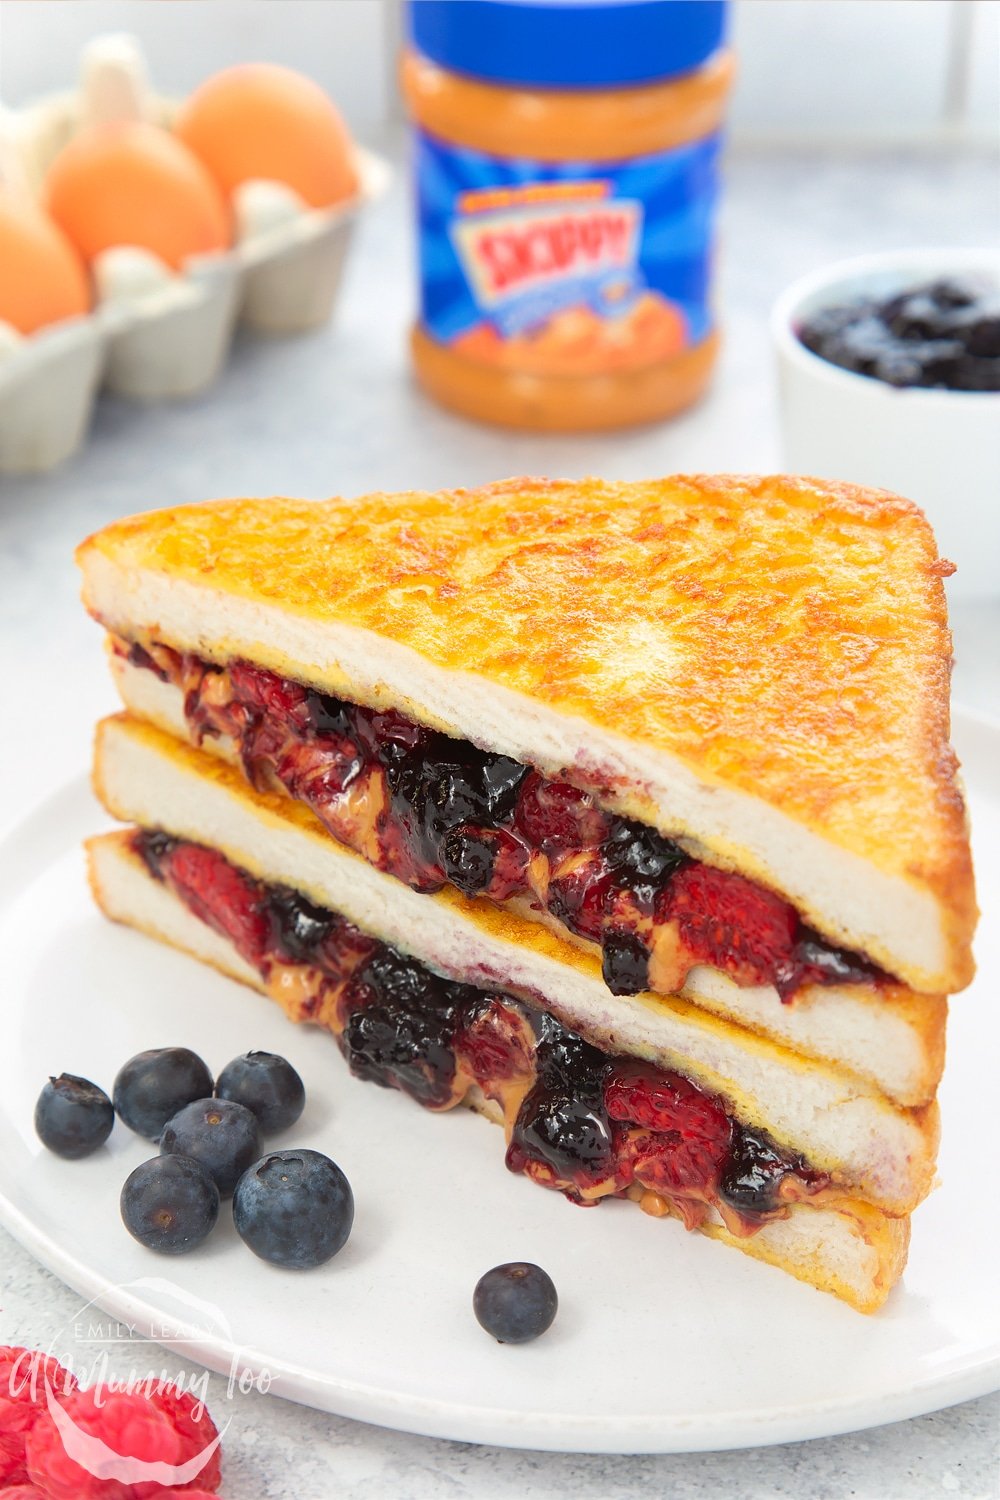 French Toast peanut butter and jelly sandwich sliced in half